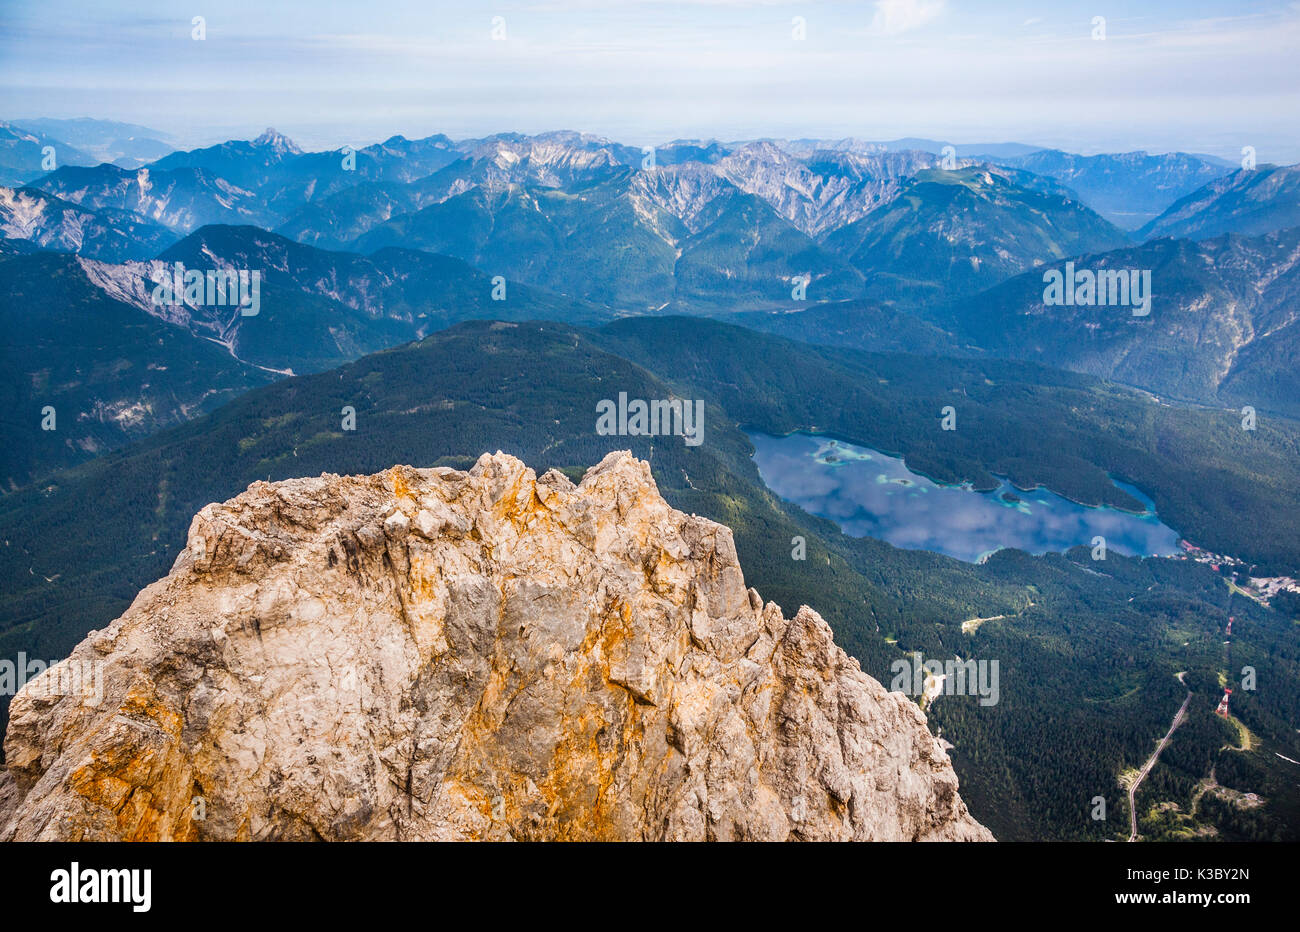 View of lake Eibsee from Zugspitze, Alps, Bavaria, Germany Stock Photo